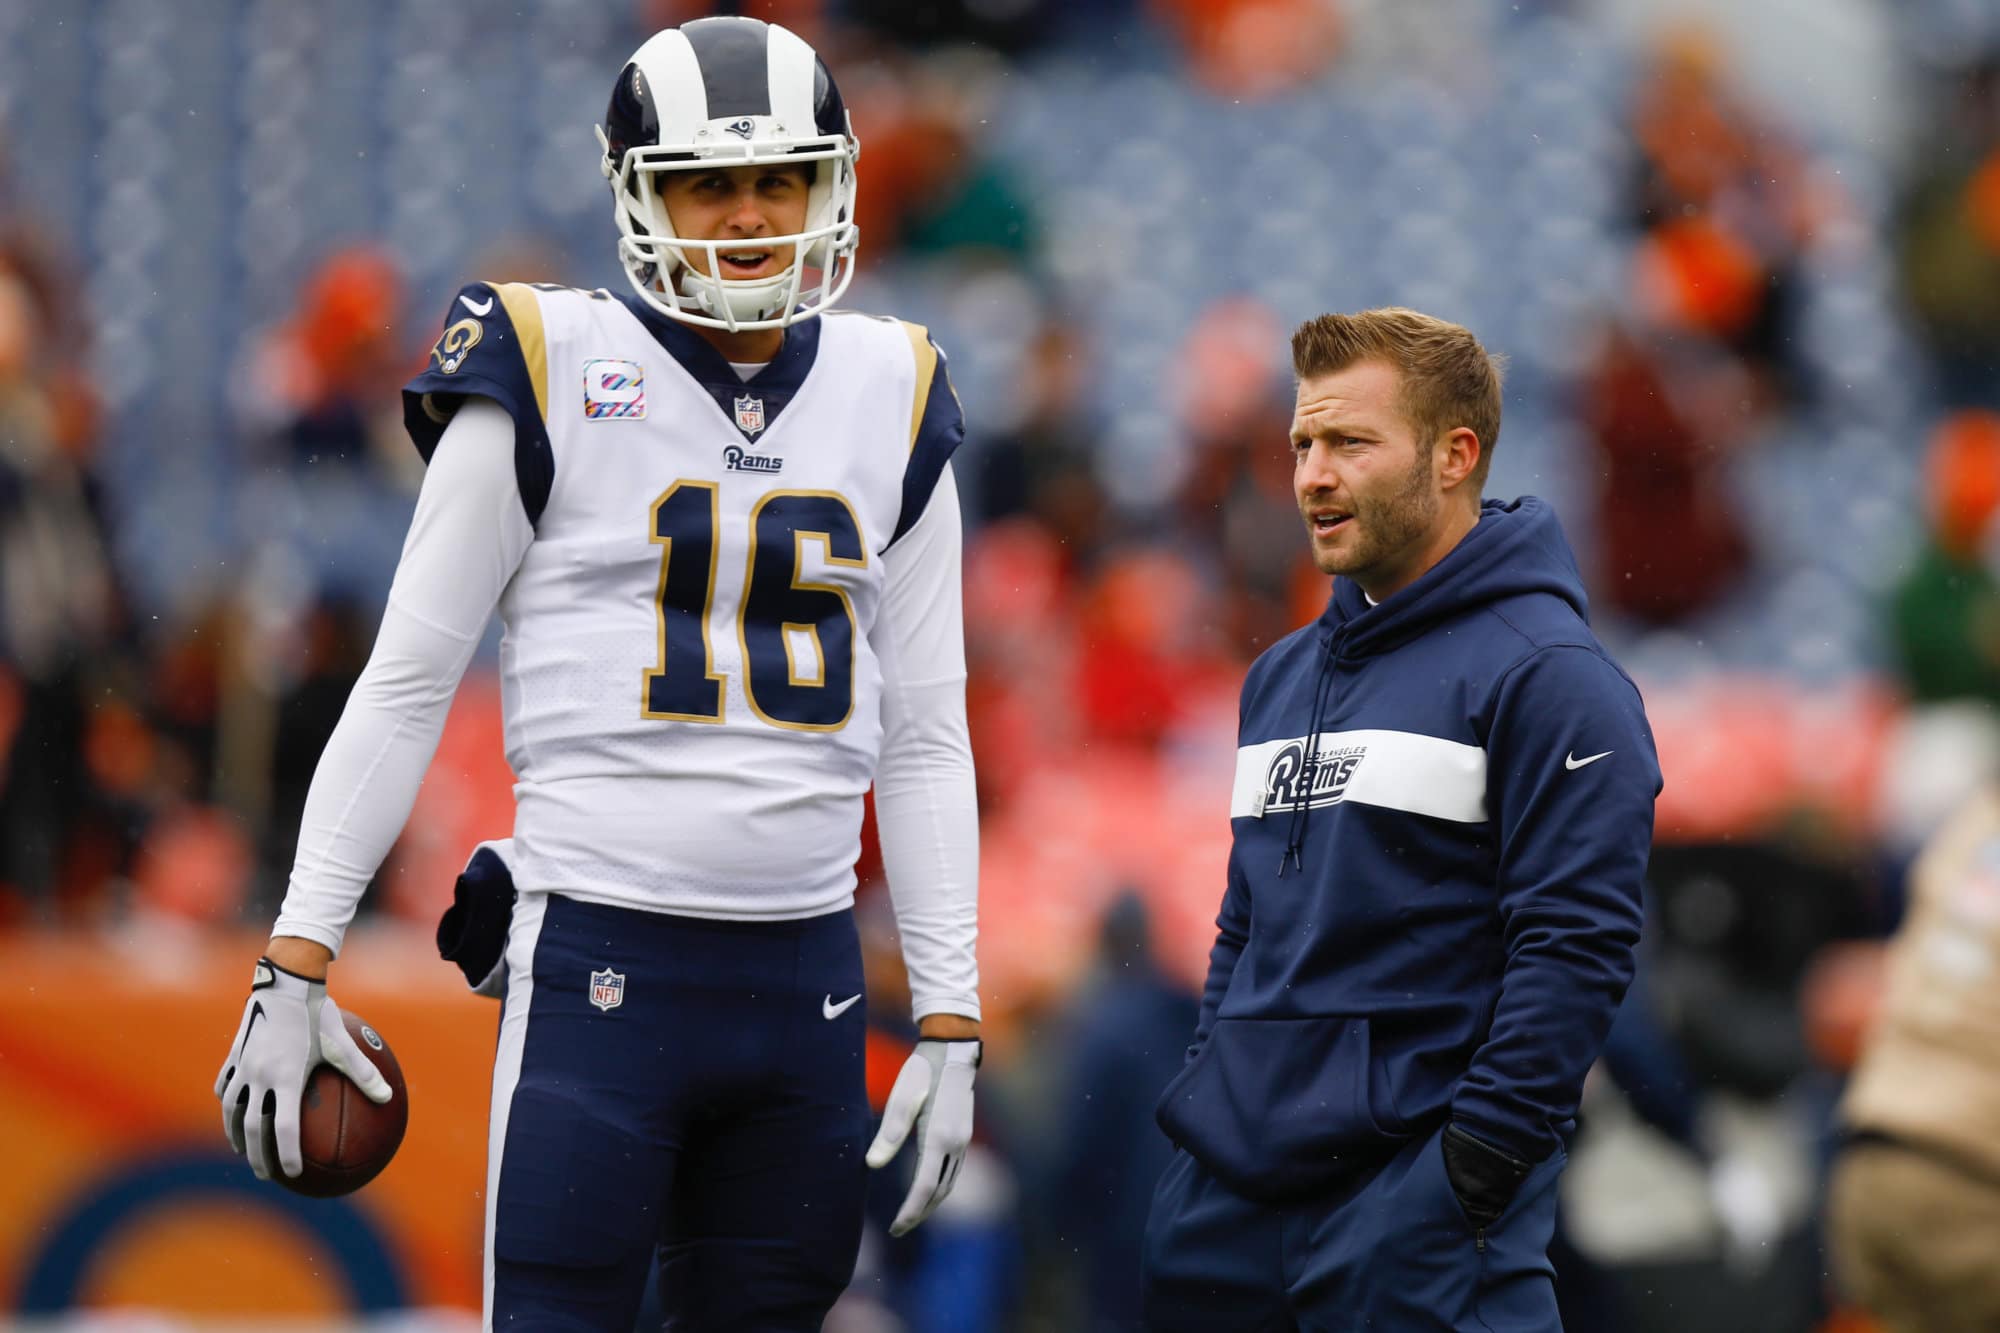 DENVER, CO - OCTOBER 14:  Quarterback Jared Goff #16 of the Los Angeles Rams talks with head coach Sean McVay before a game against the Denver Broncos at Broncos Stadium at Mile High on October 14, 2018 in Denver, Colorado. (Photo by Justin Edmonds/Getty Images)